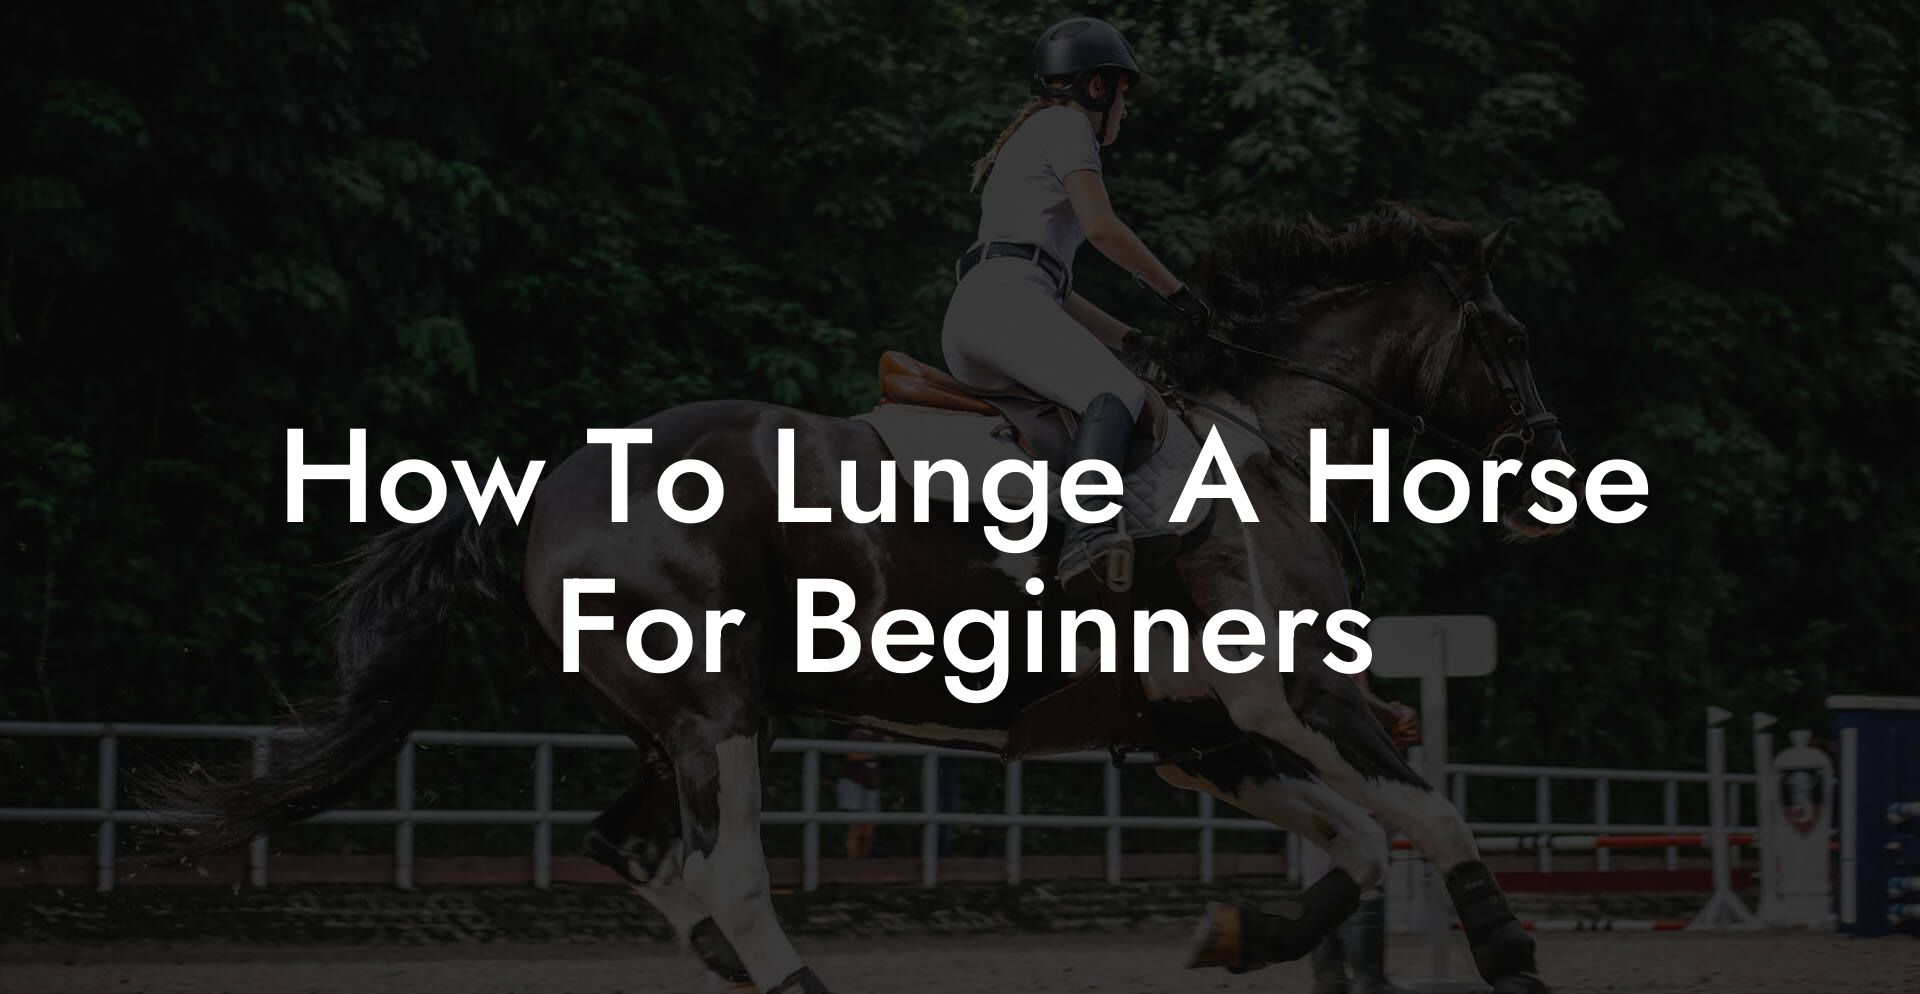 How To Lunge A Horse For Beginners